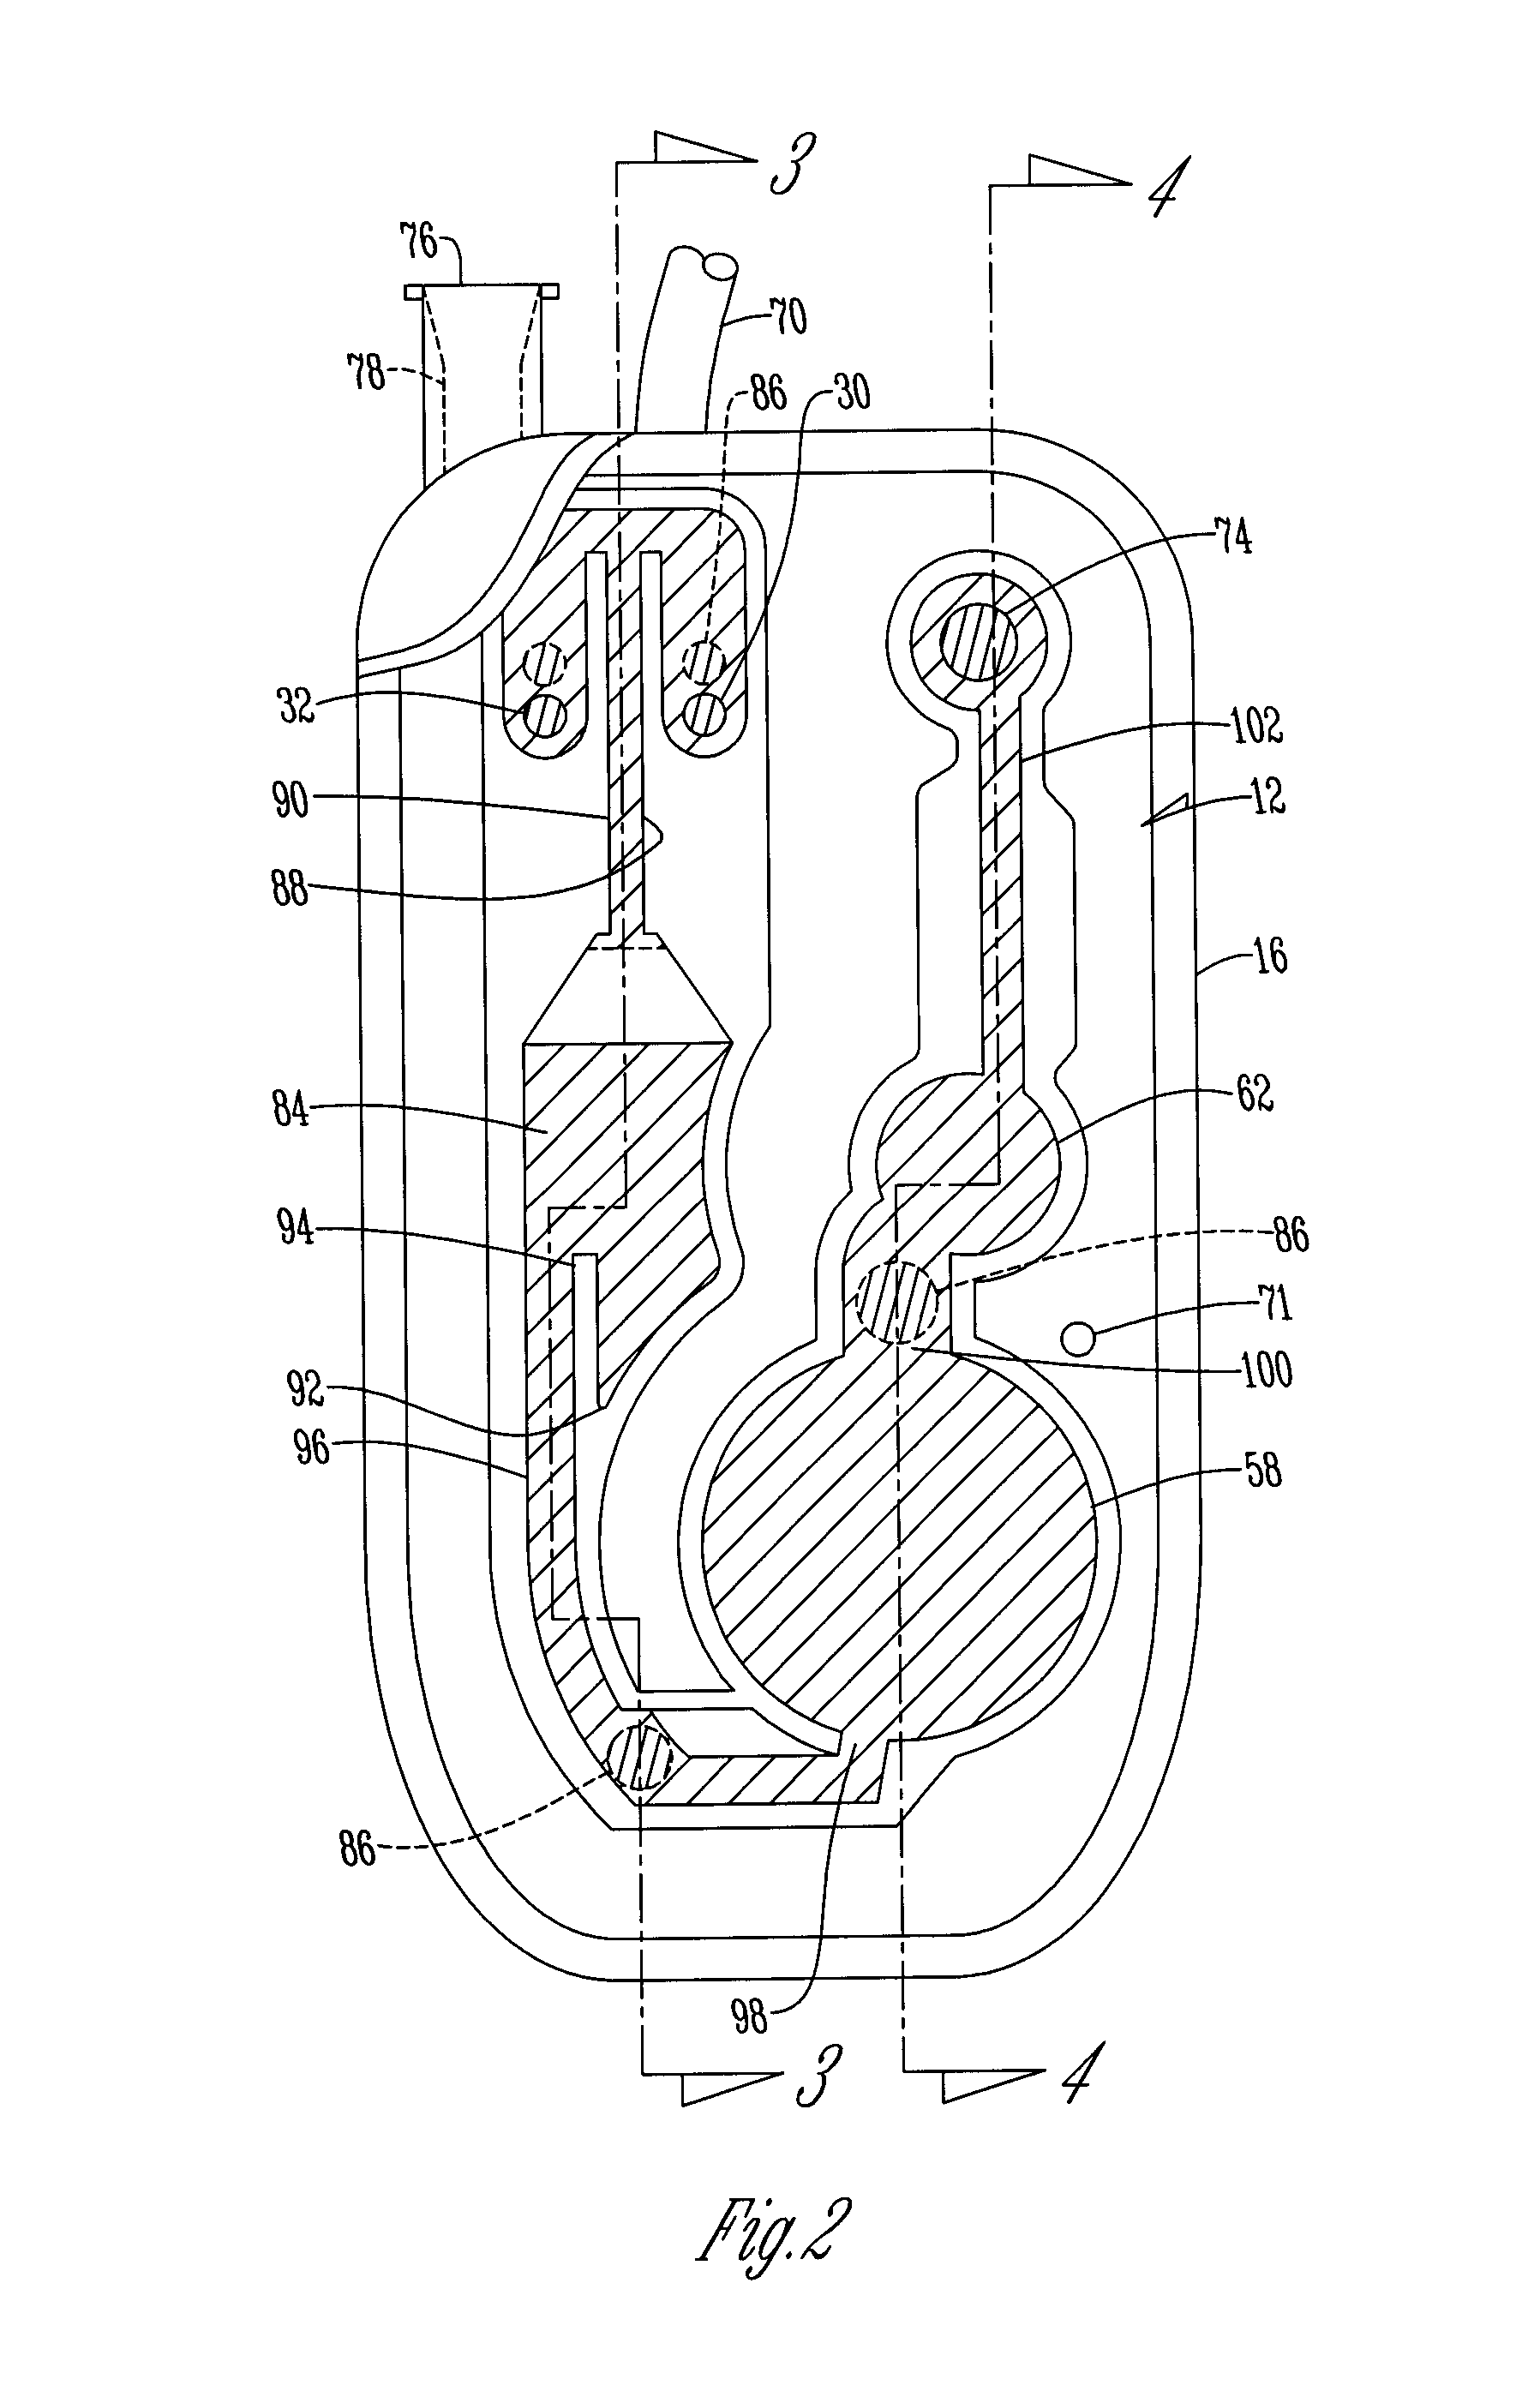 Apparatus and method of mitigating free flow in a fluid administration set